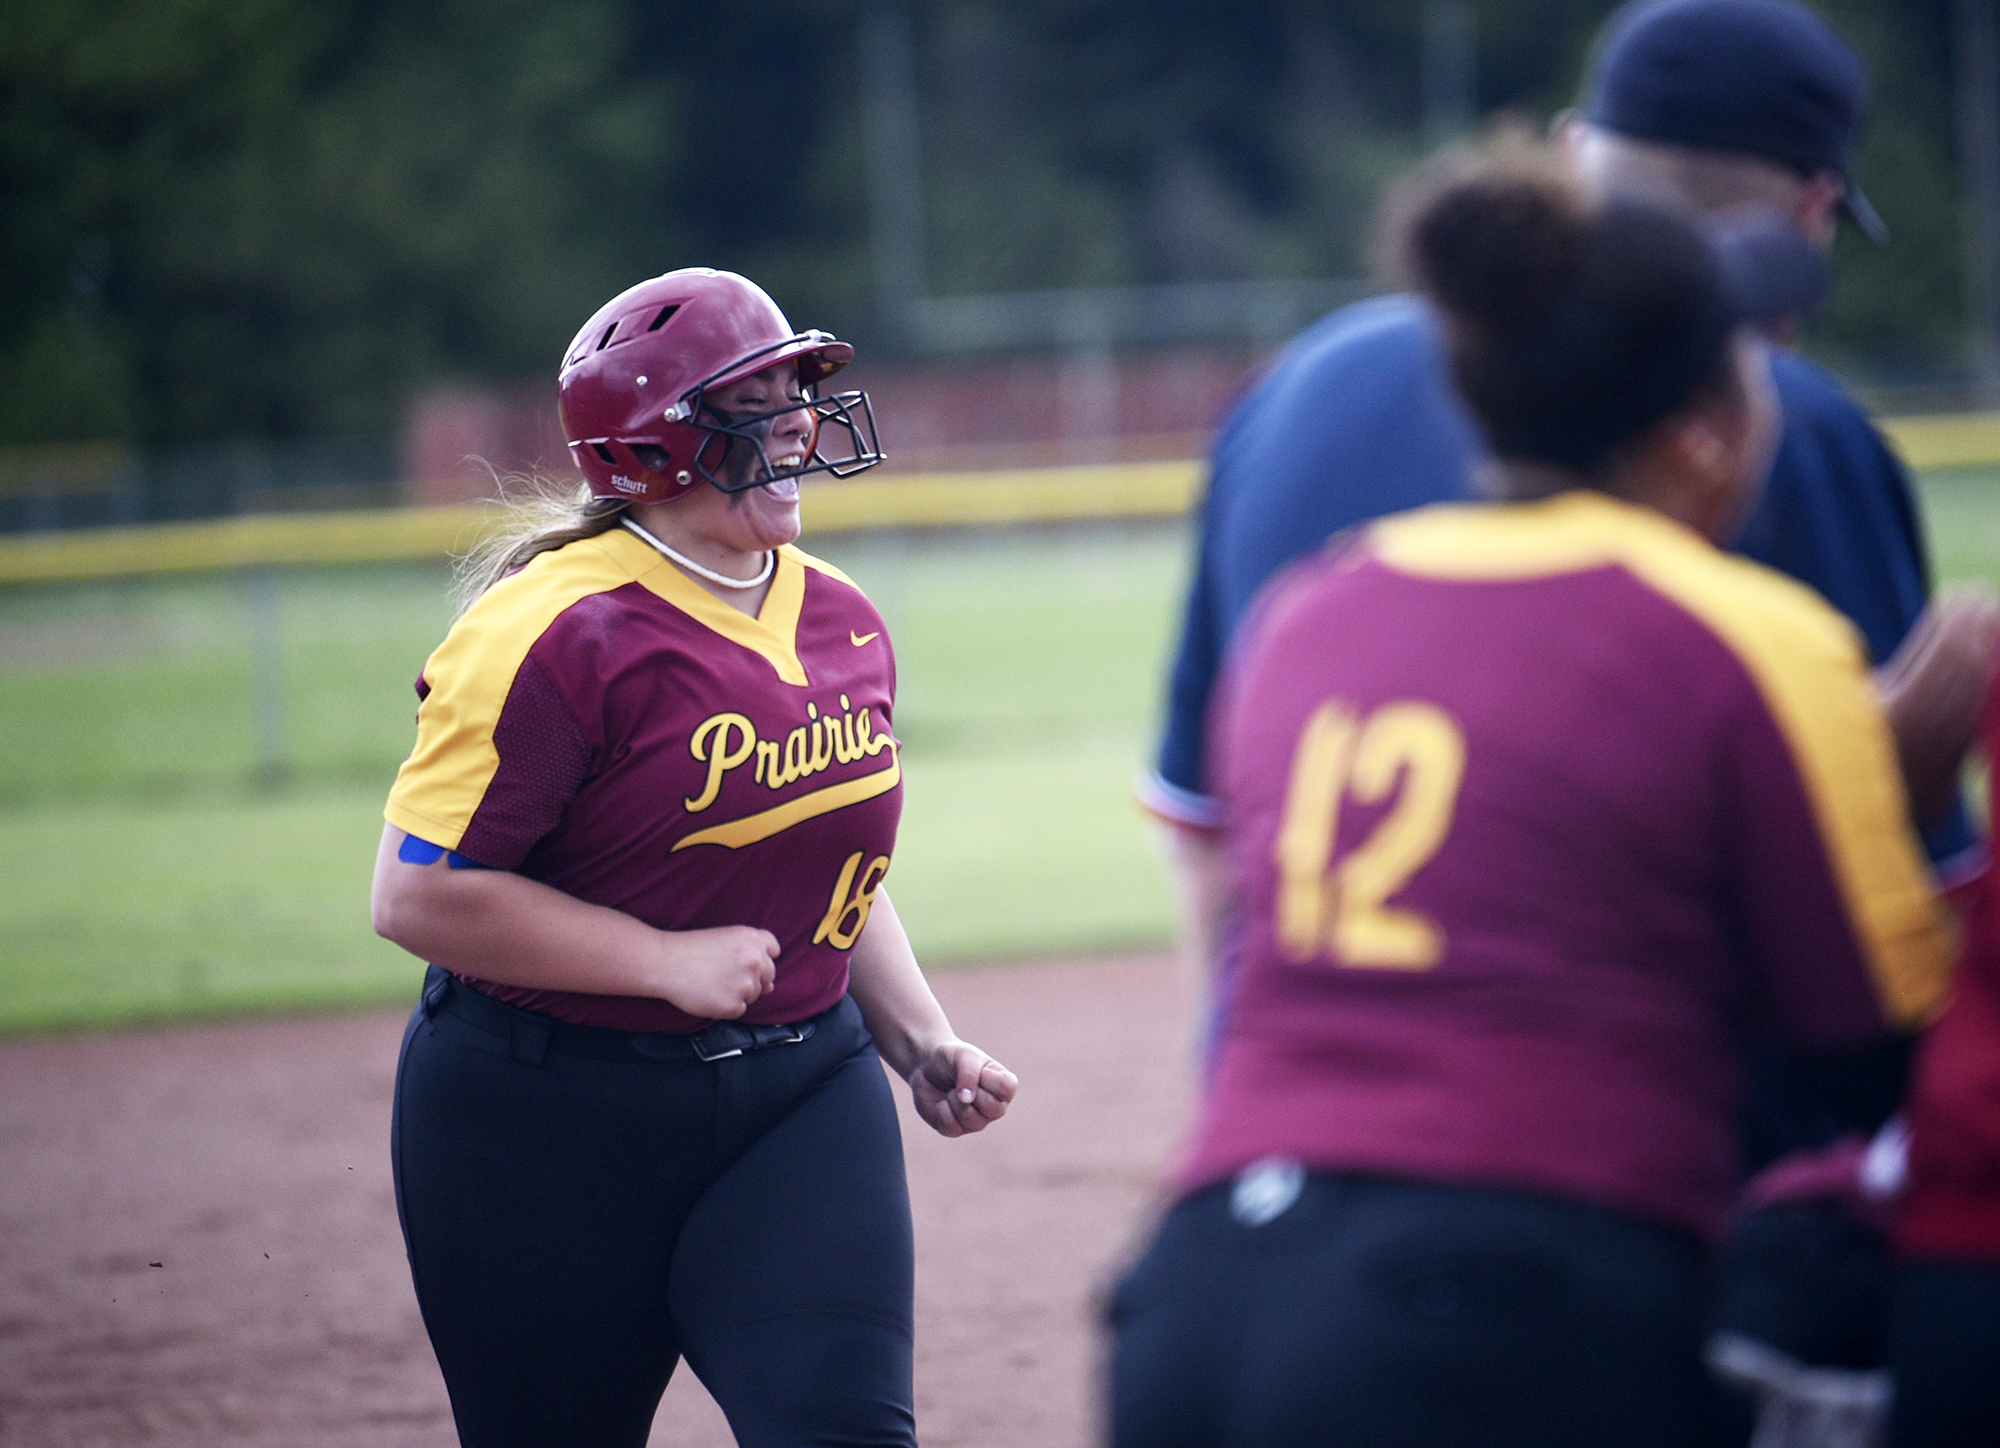 Prairie's Nae Stalcup celebrates after hitting a three-run home run during Prairie's 10-0 win over Evergreen in a 3A Greater St. Helens League softball game at Prairie on Monday, May 8, 2023.